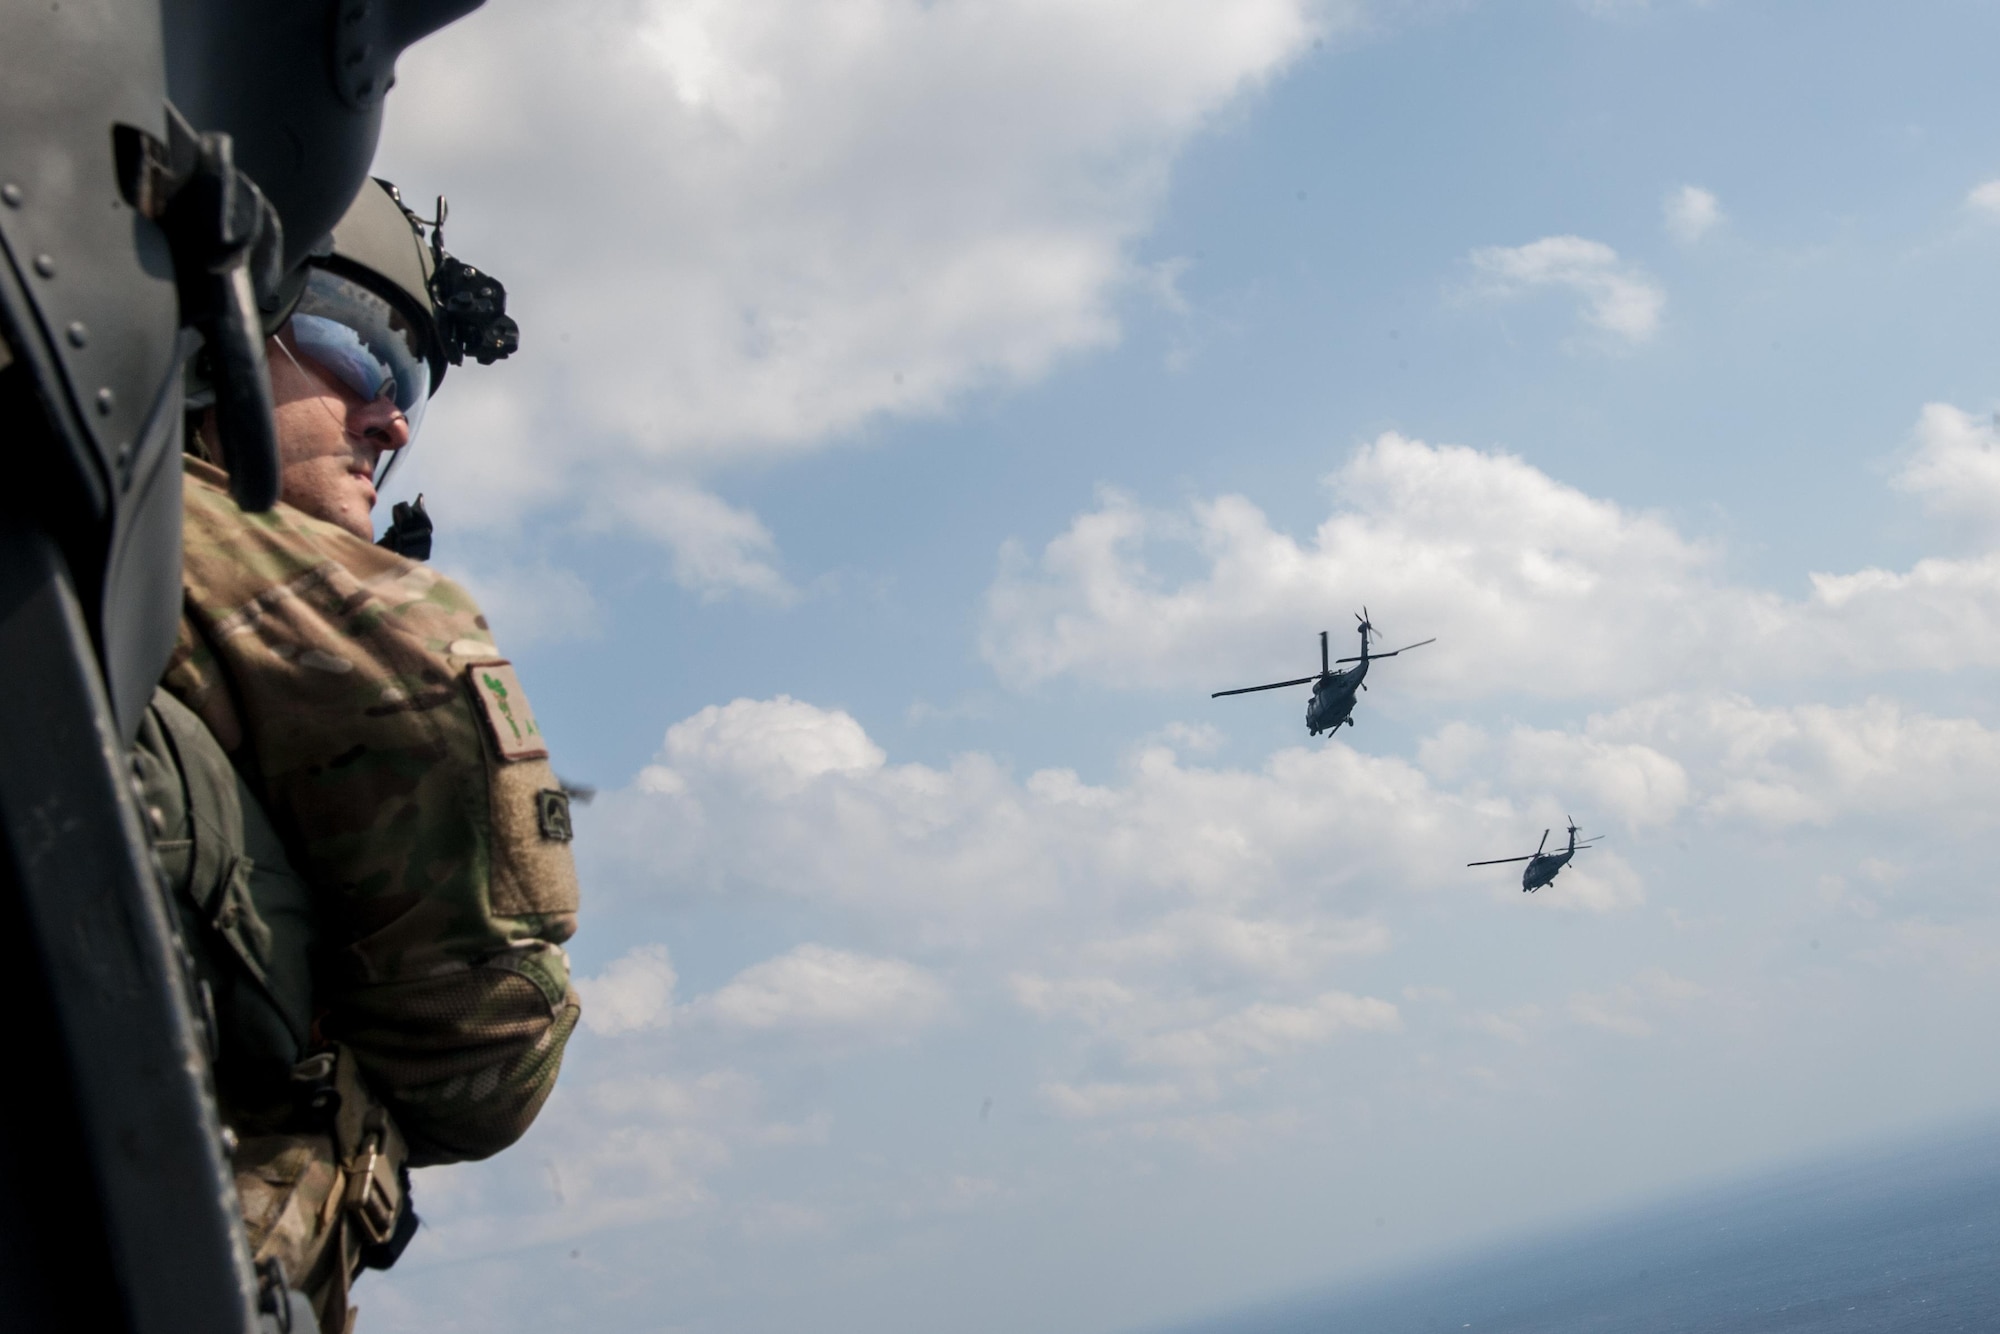 U.S. Air Force Master Sgt. Vincent Hnat, 33rd Rescue Squadron special mission aviator, scans his surroundings aboard a HH-60G Pave Hawk helicopter Nov. 4, 2016, off the coast of Okinawa, Japan as part of exercise Keen Sword. During the exercise, combat rescue teams train to increase the interoperability required to support the defense of Japan, respond to a potential crisis and offer humanitarian assistance. (U.S. Air Force photo by Senior Airman John Linzmeier)